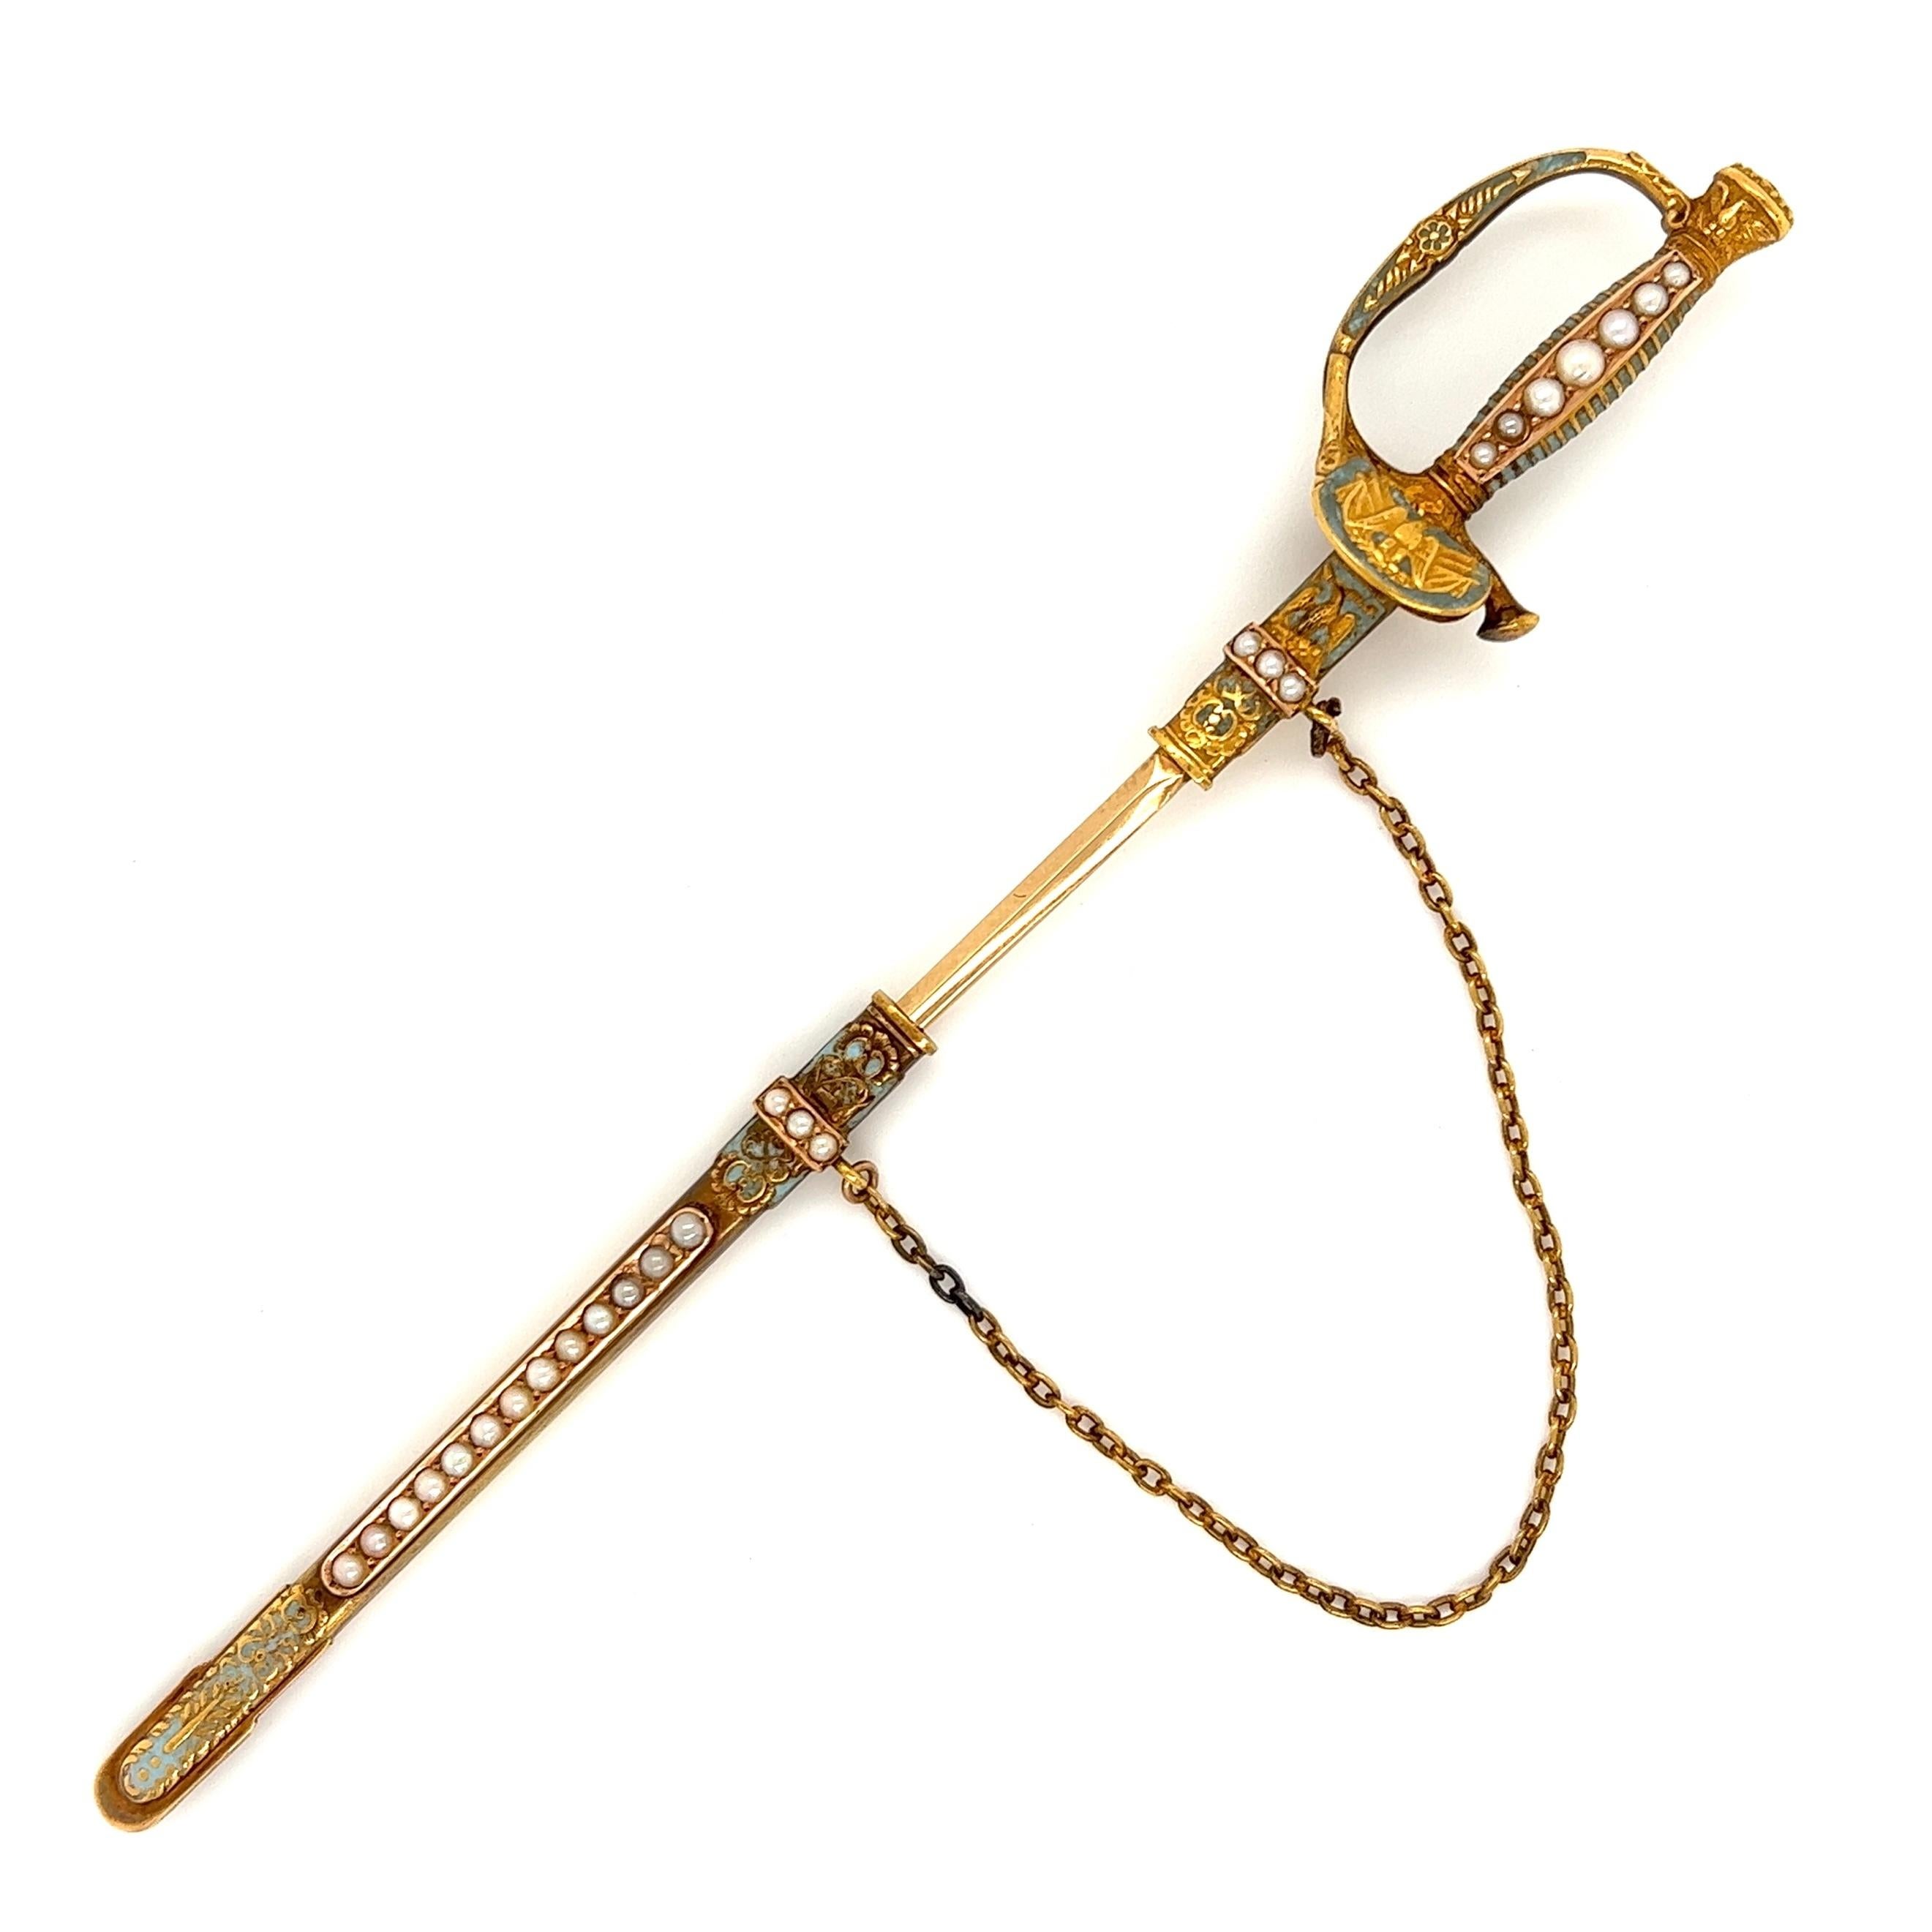 Awesome Antique Victorian Enamel and Seed Pearls Sword 14K Yellow Gold Jabot Pin. Beautifully Hand crafted in 14K yellow Gold. Measuring approx. size 5” Long. More Beautiful in real time! For that Special Someone…including You! 
